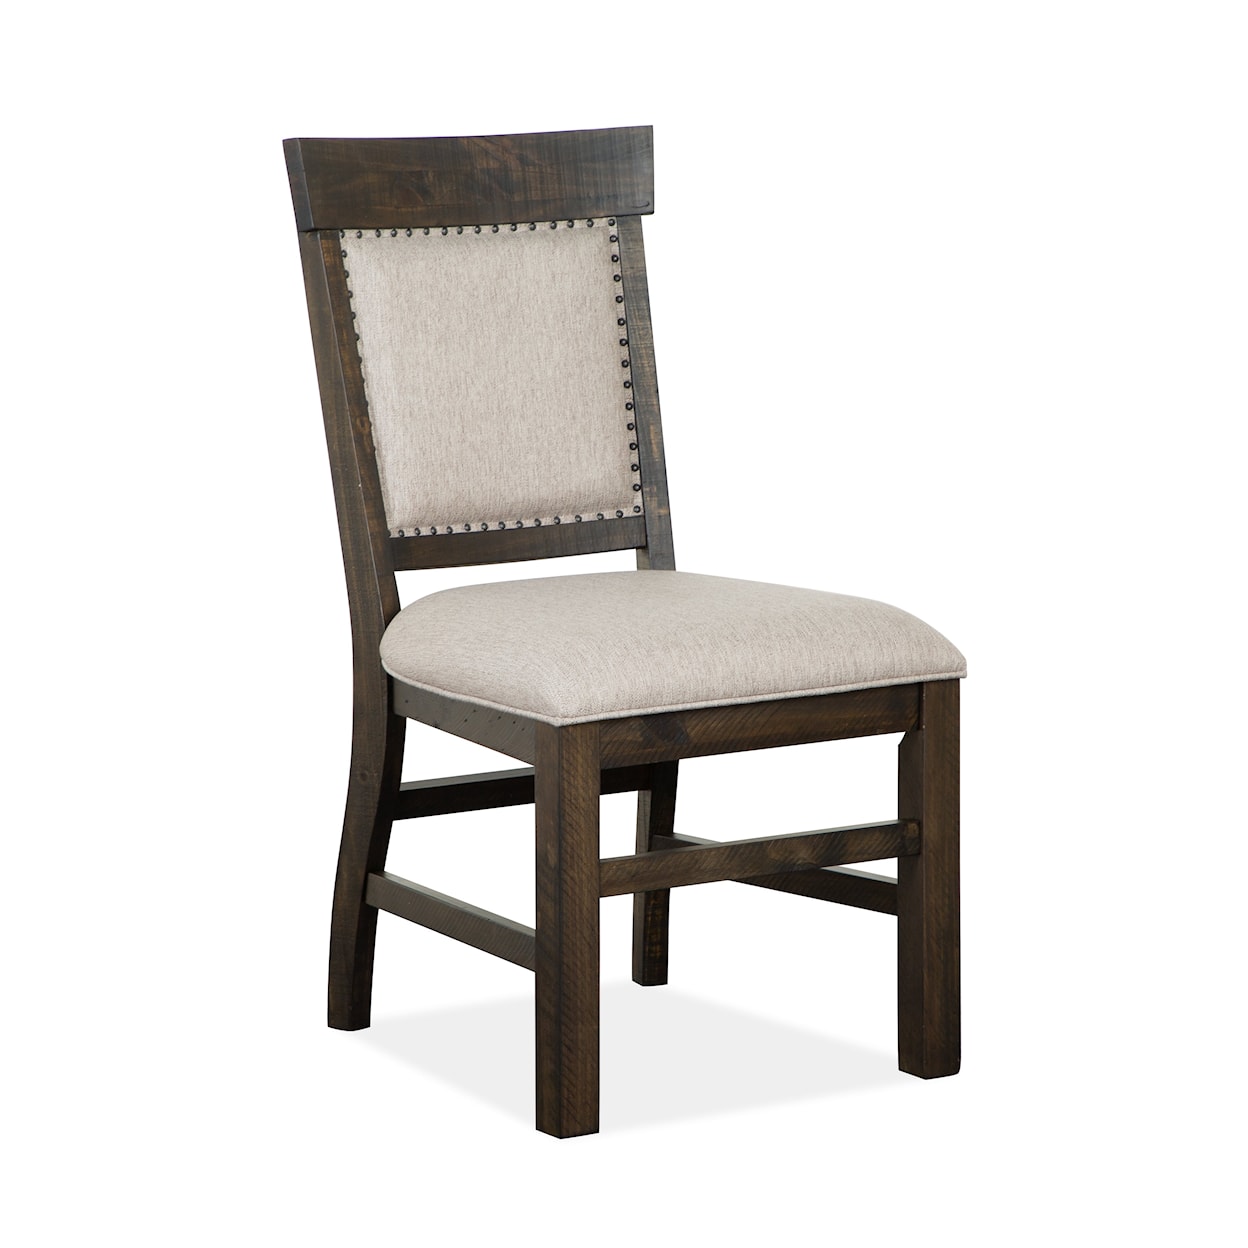 Magnussen Home Bellamy Dining Dining Side Chair